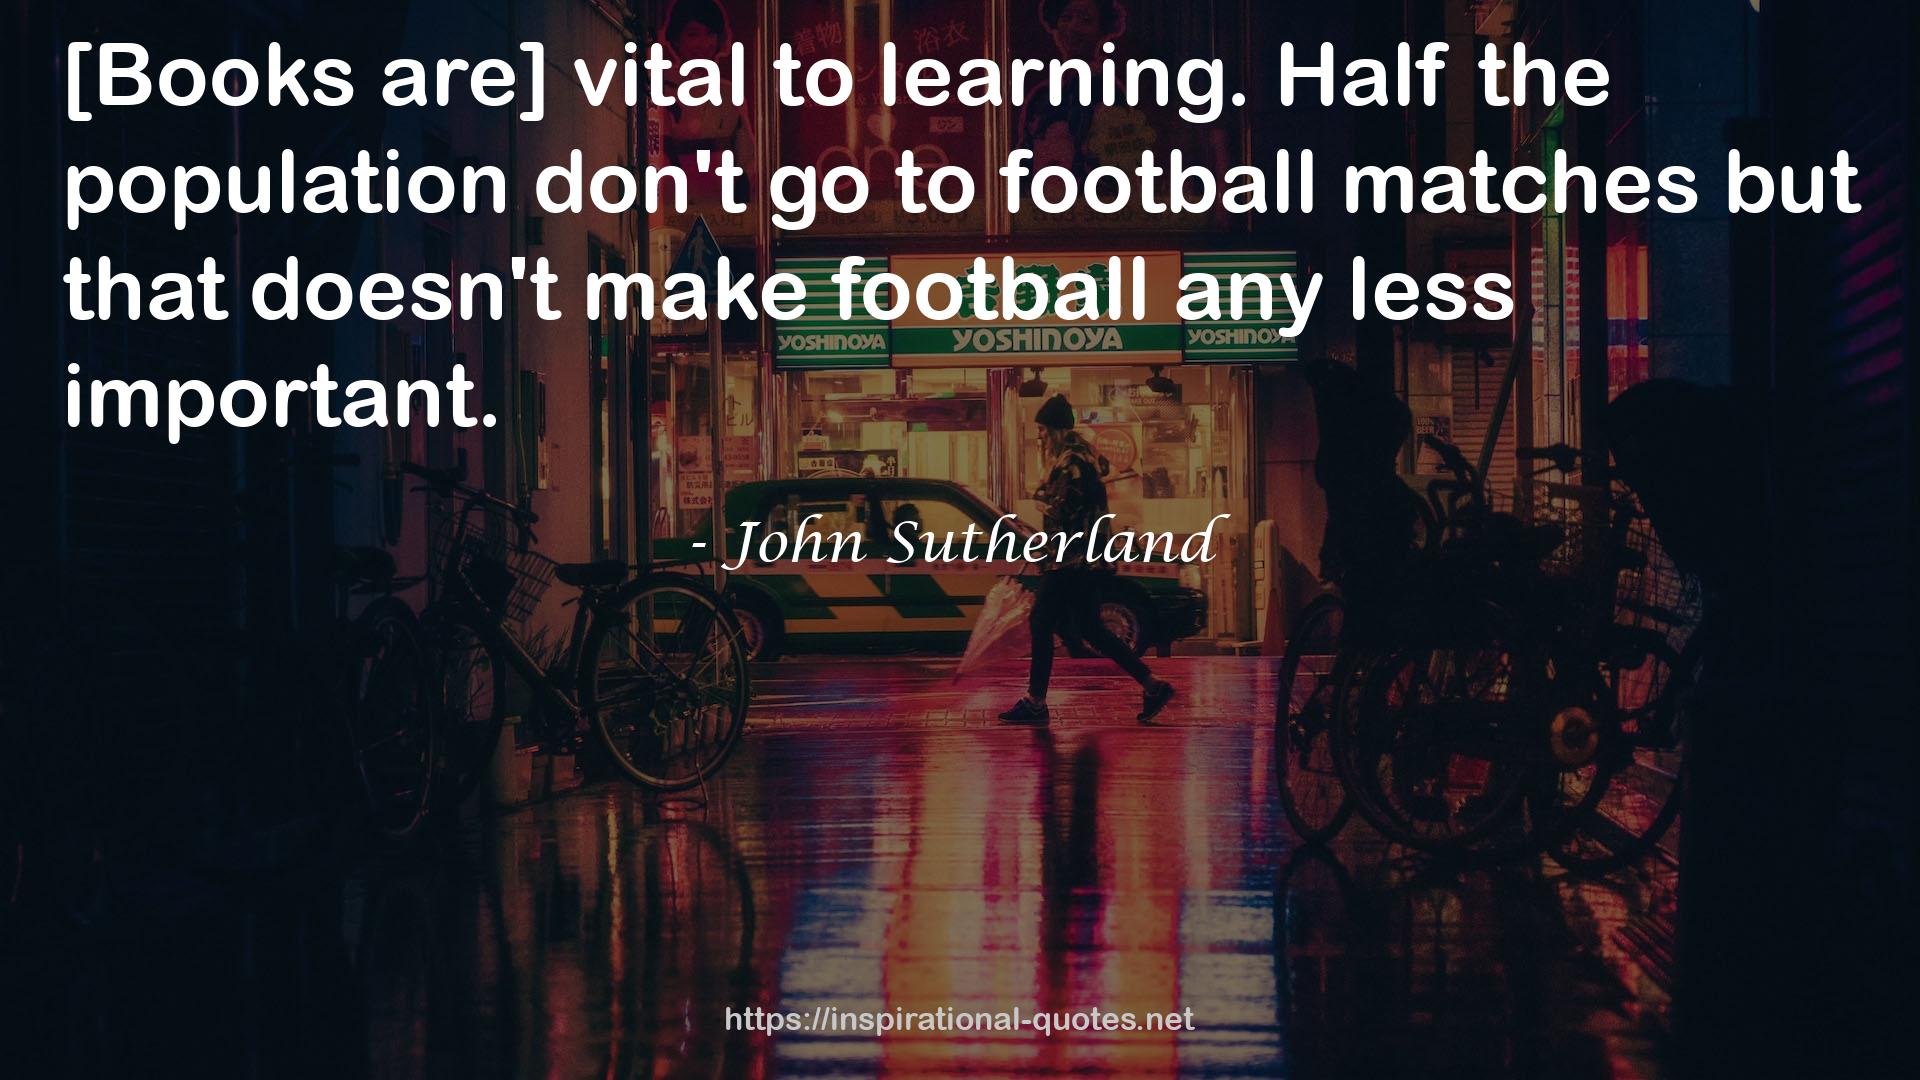 football matches  QUOTES